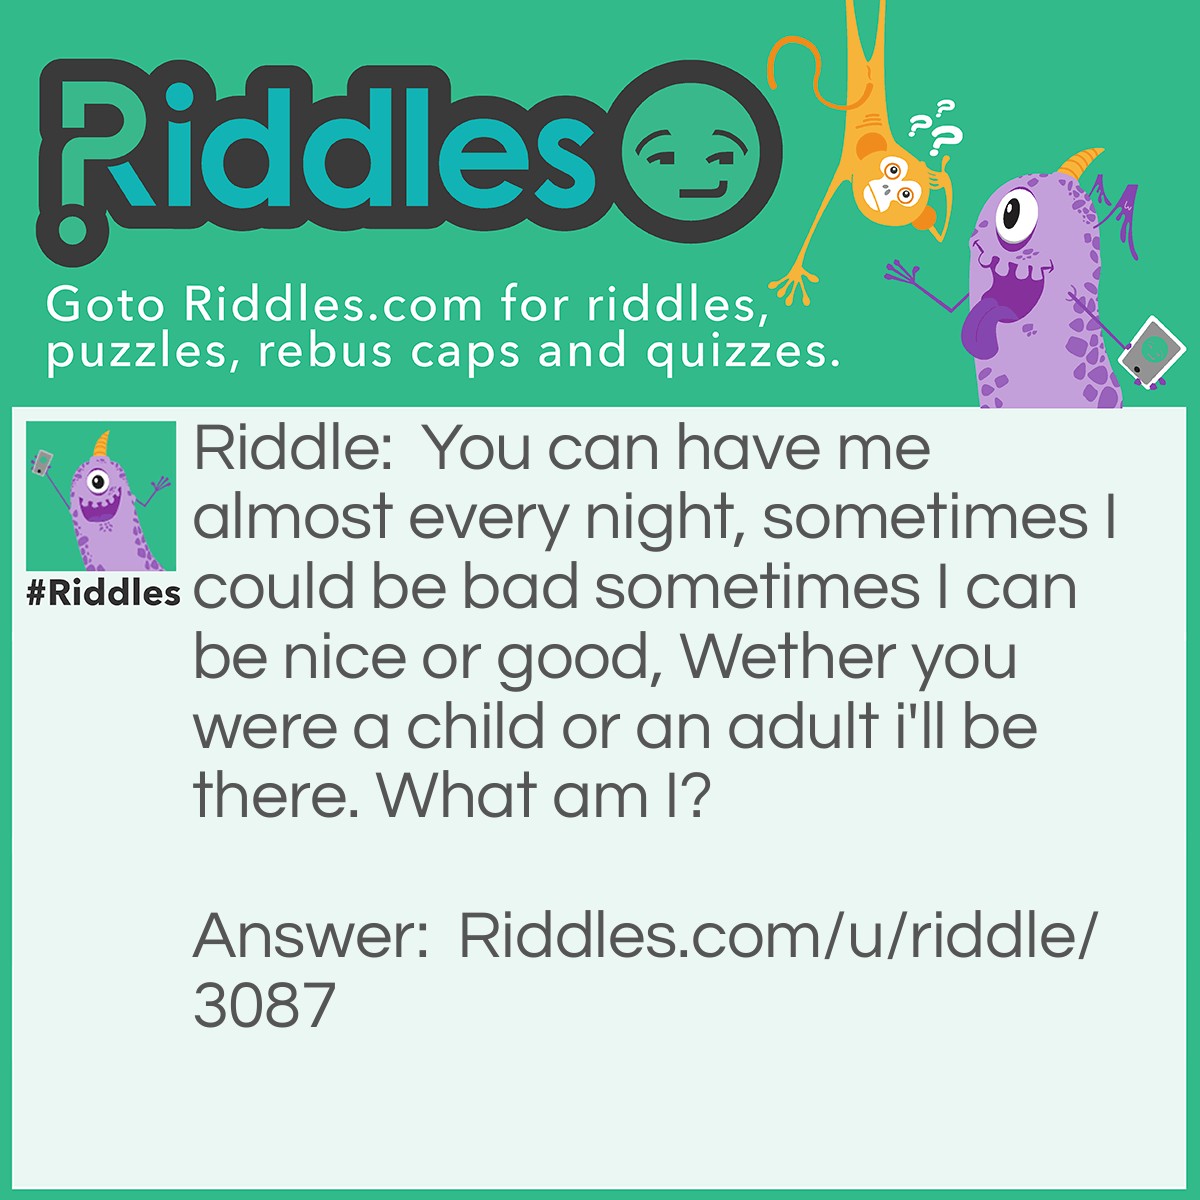 Riddle: You can have me almost every night, sometimes I could be bad sometimes I can be nice or good, whether you were a child or an adult I'll be there. What am I? Answer: Dreams between (Sweet dreams, Nightmare).